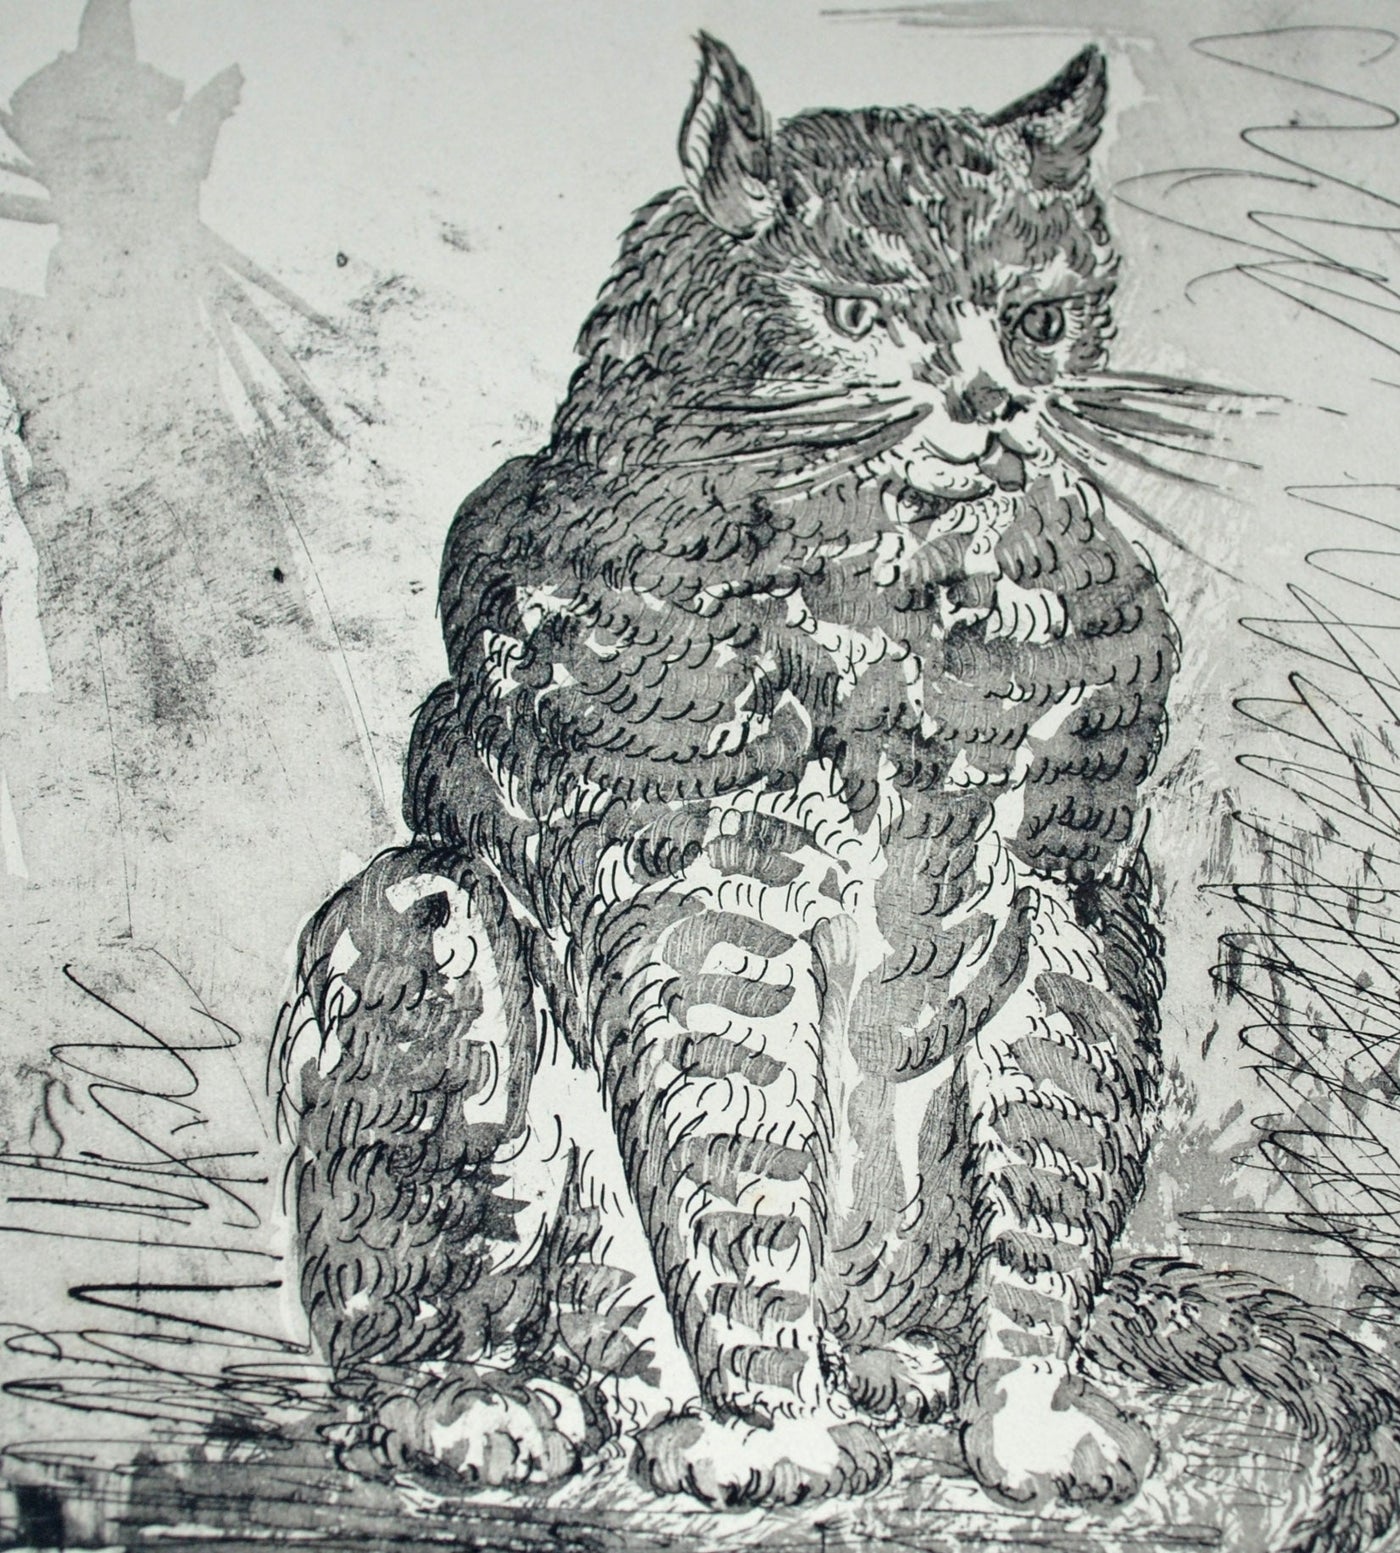 Pablo Picasso Le Chat (The Cat) (Bloch 329, Cramer No. 37) 1942